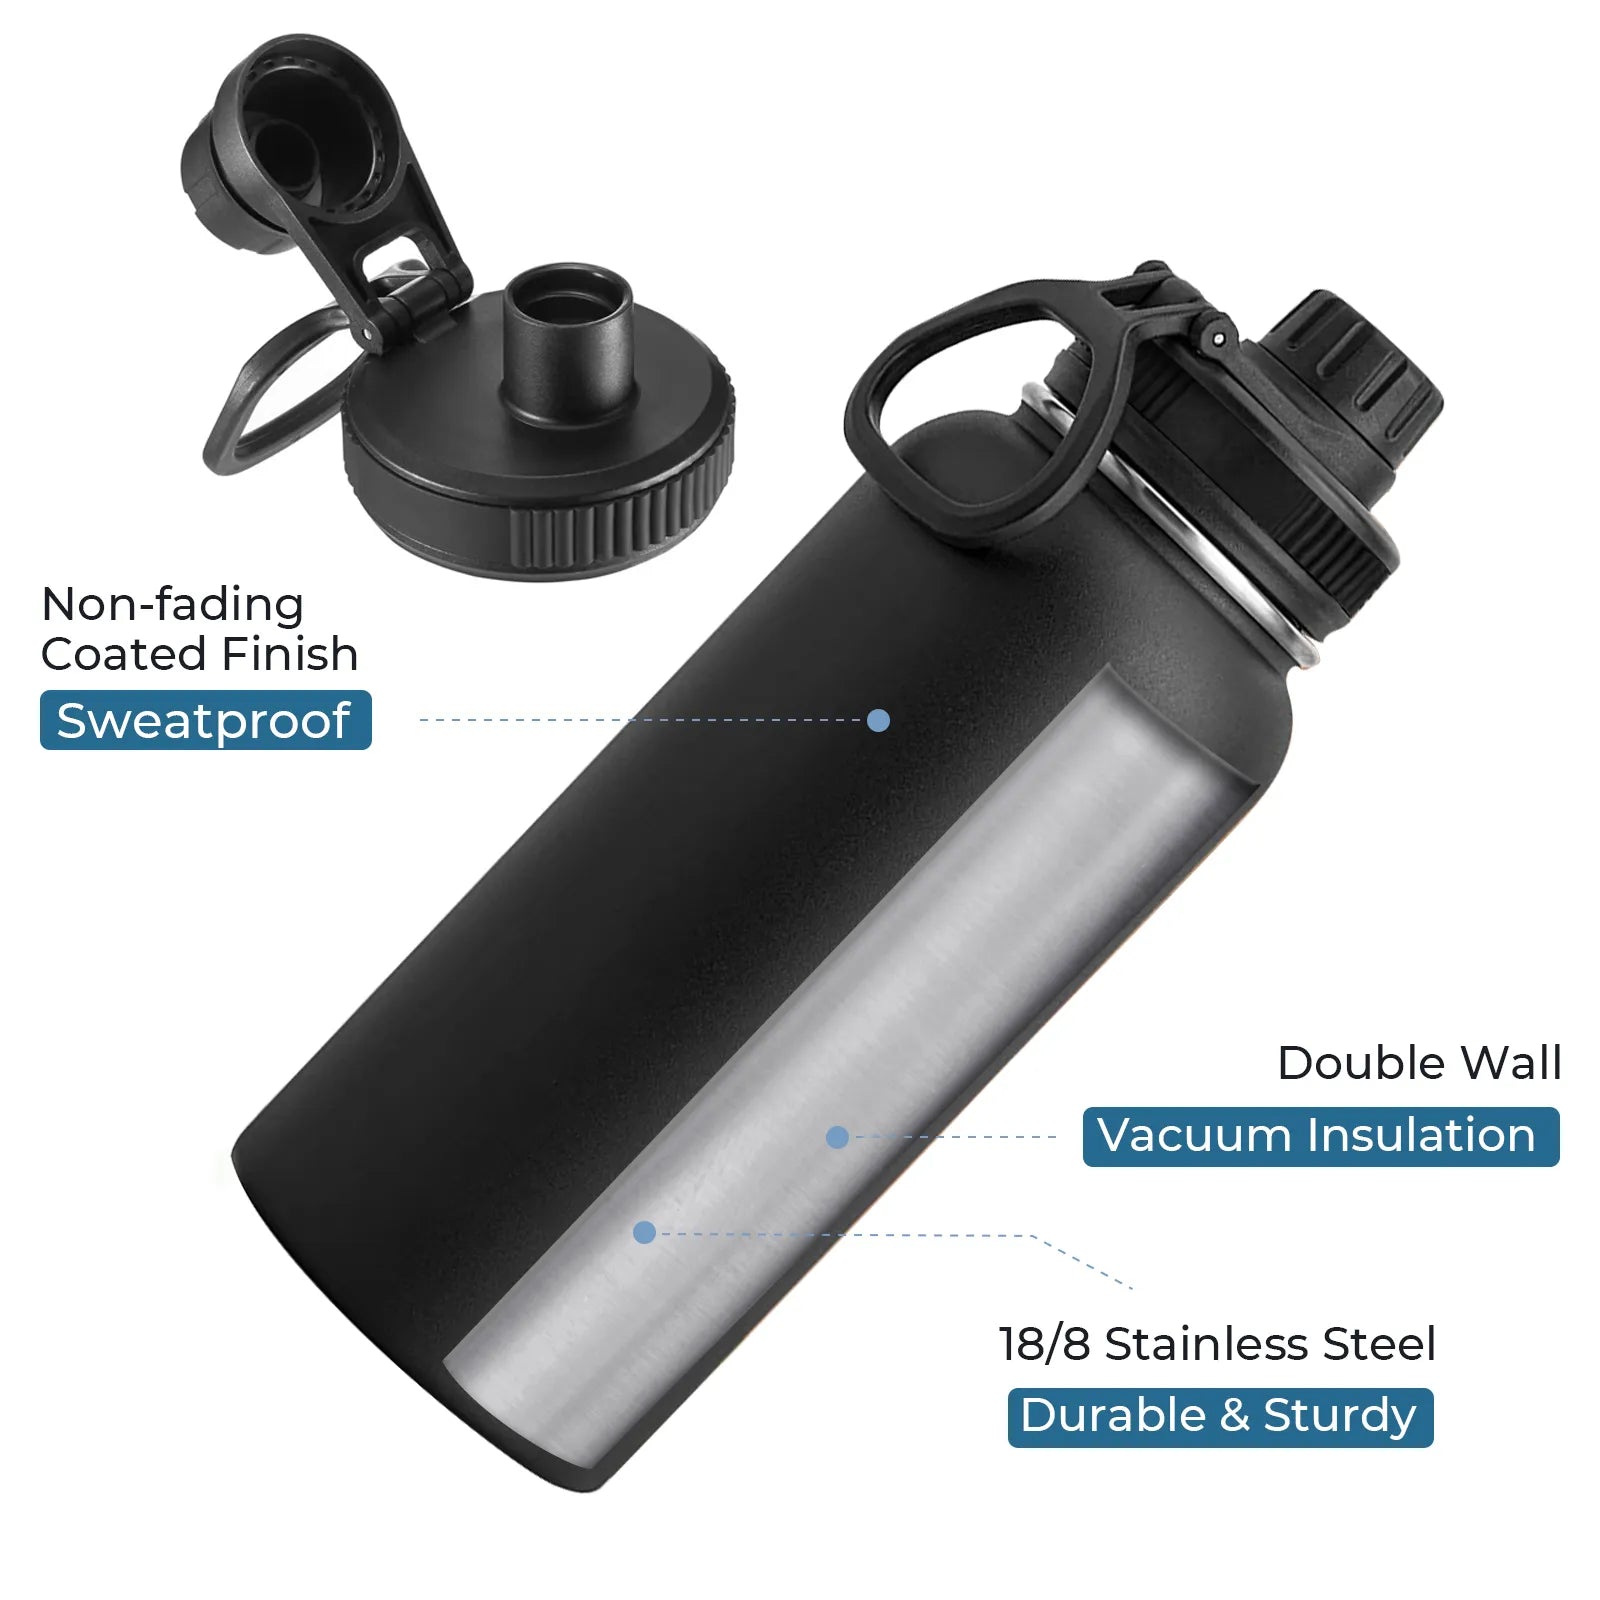 32oz Black Stainless Steel Insulated Water Bottle with Chug Cap